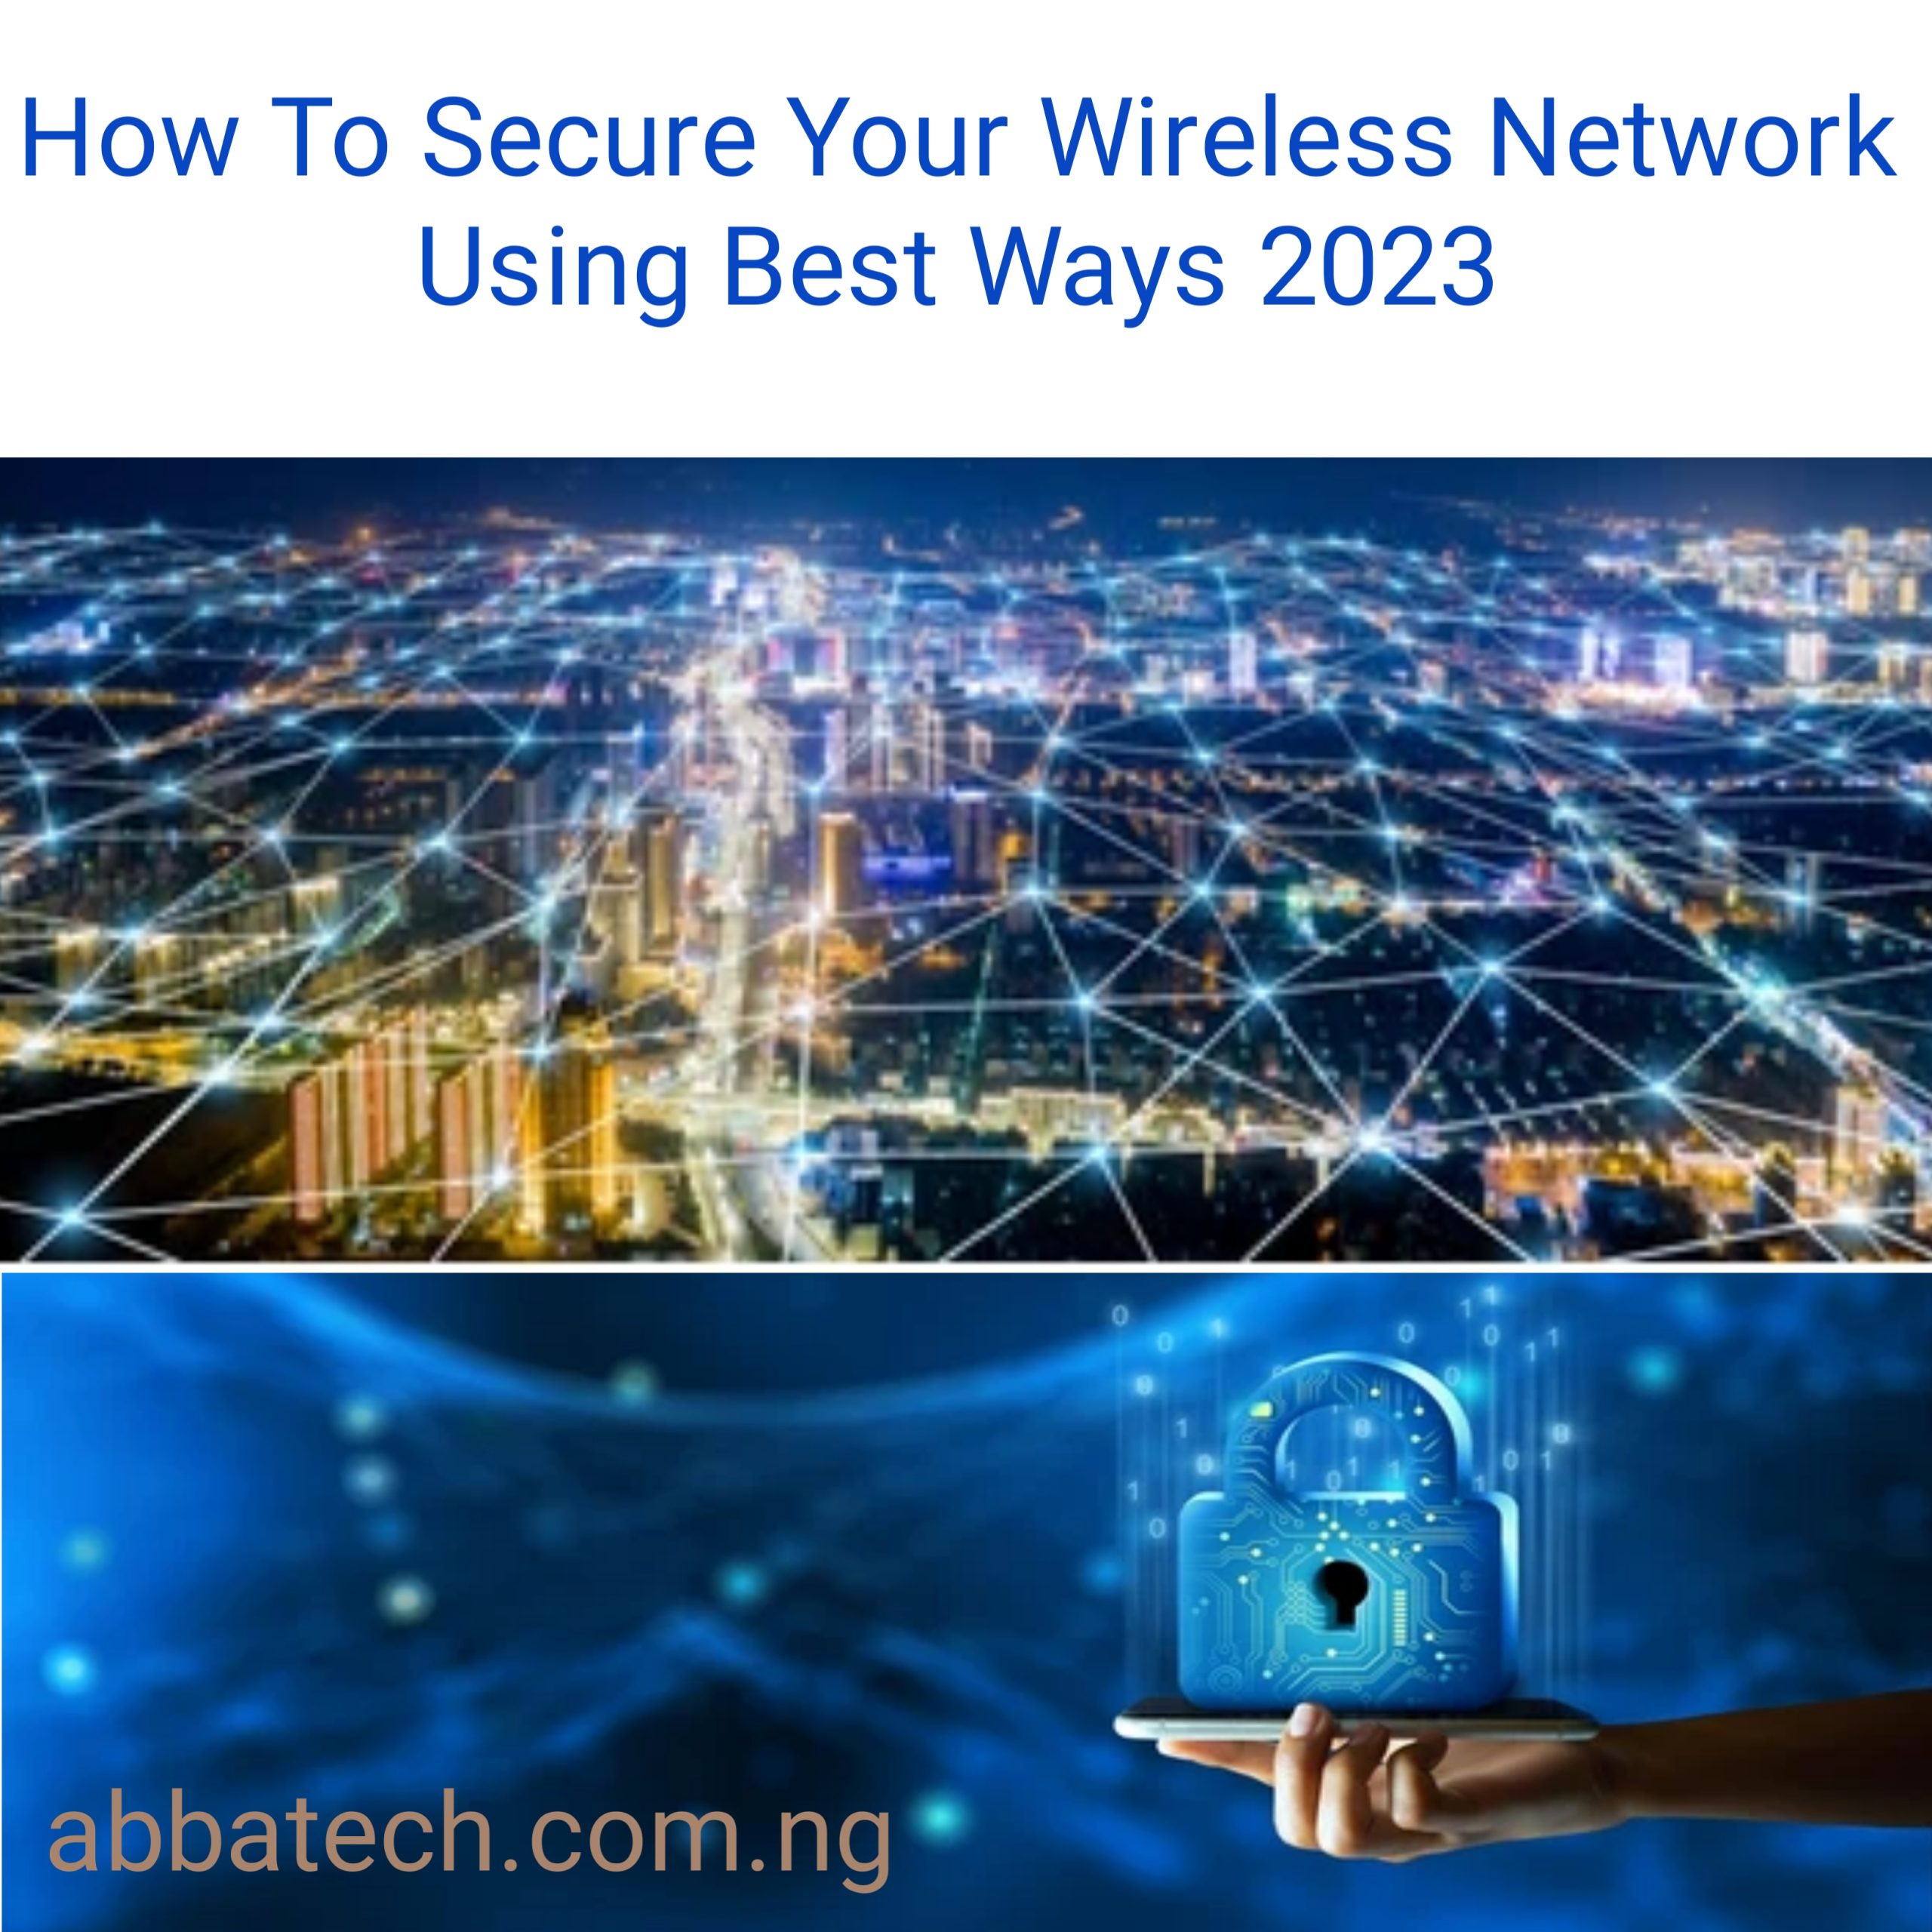 How To Secure Your Wireless Network Using Best Ways 2023